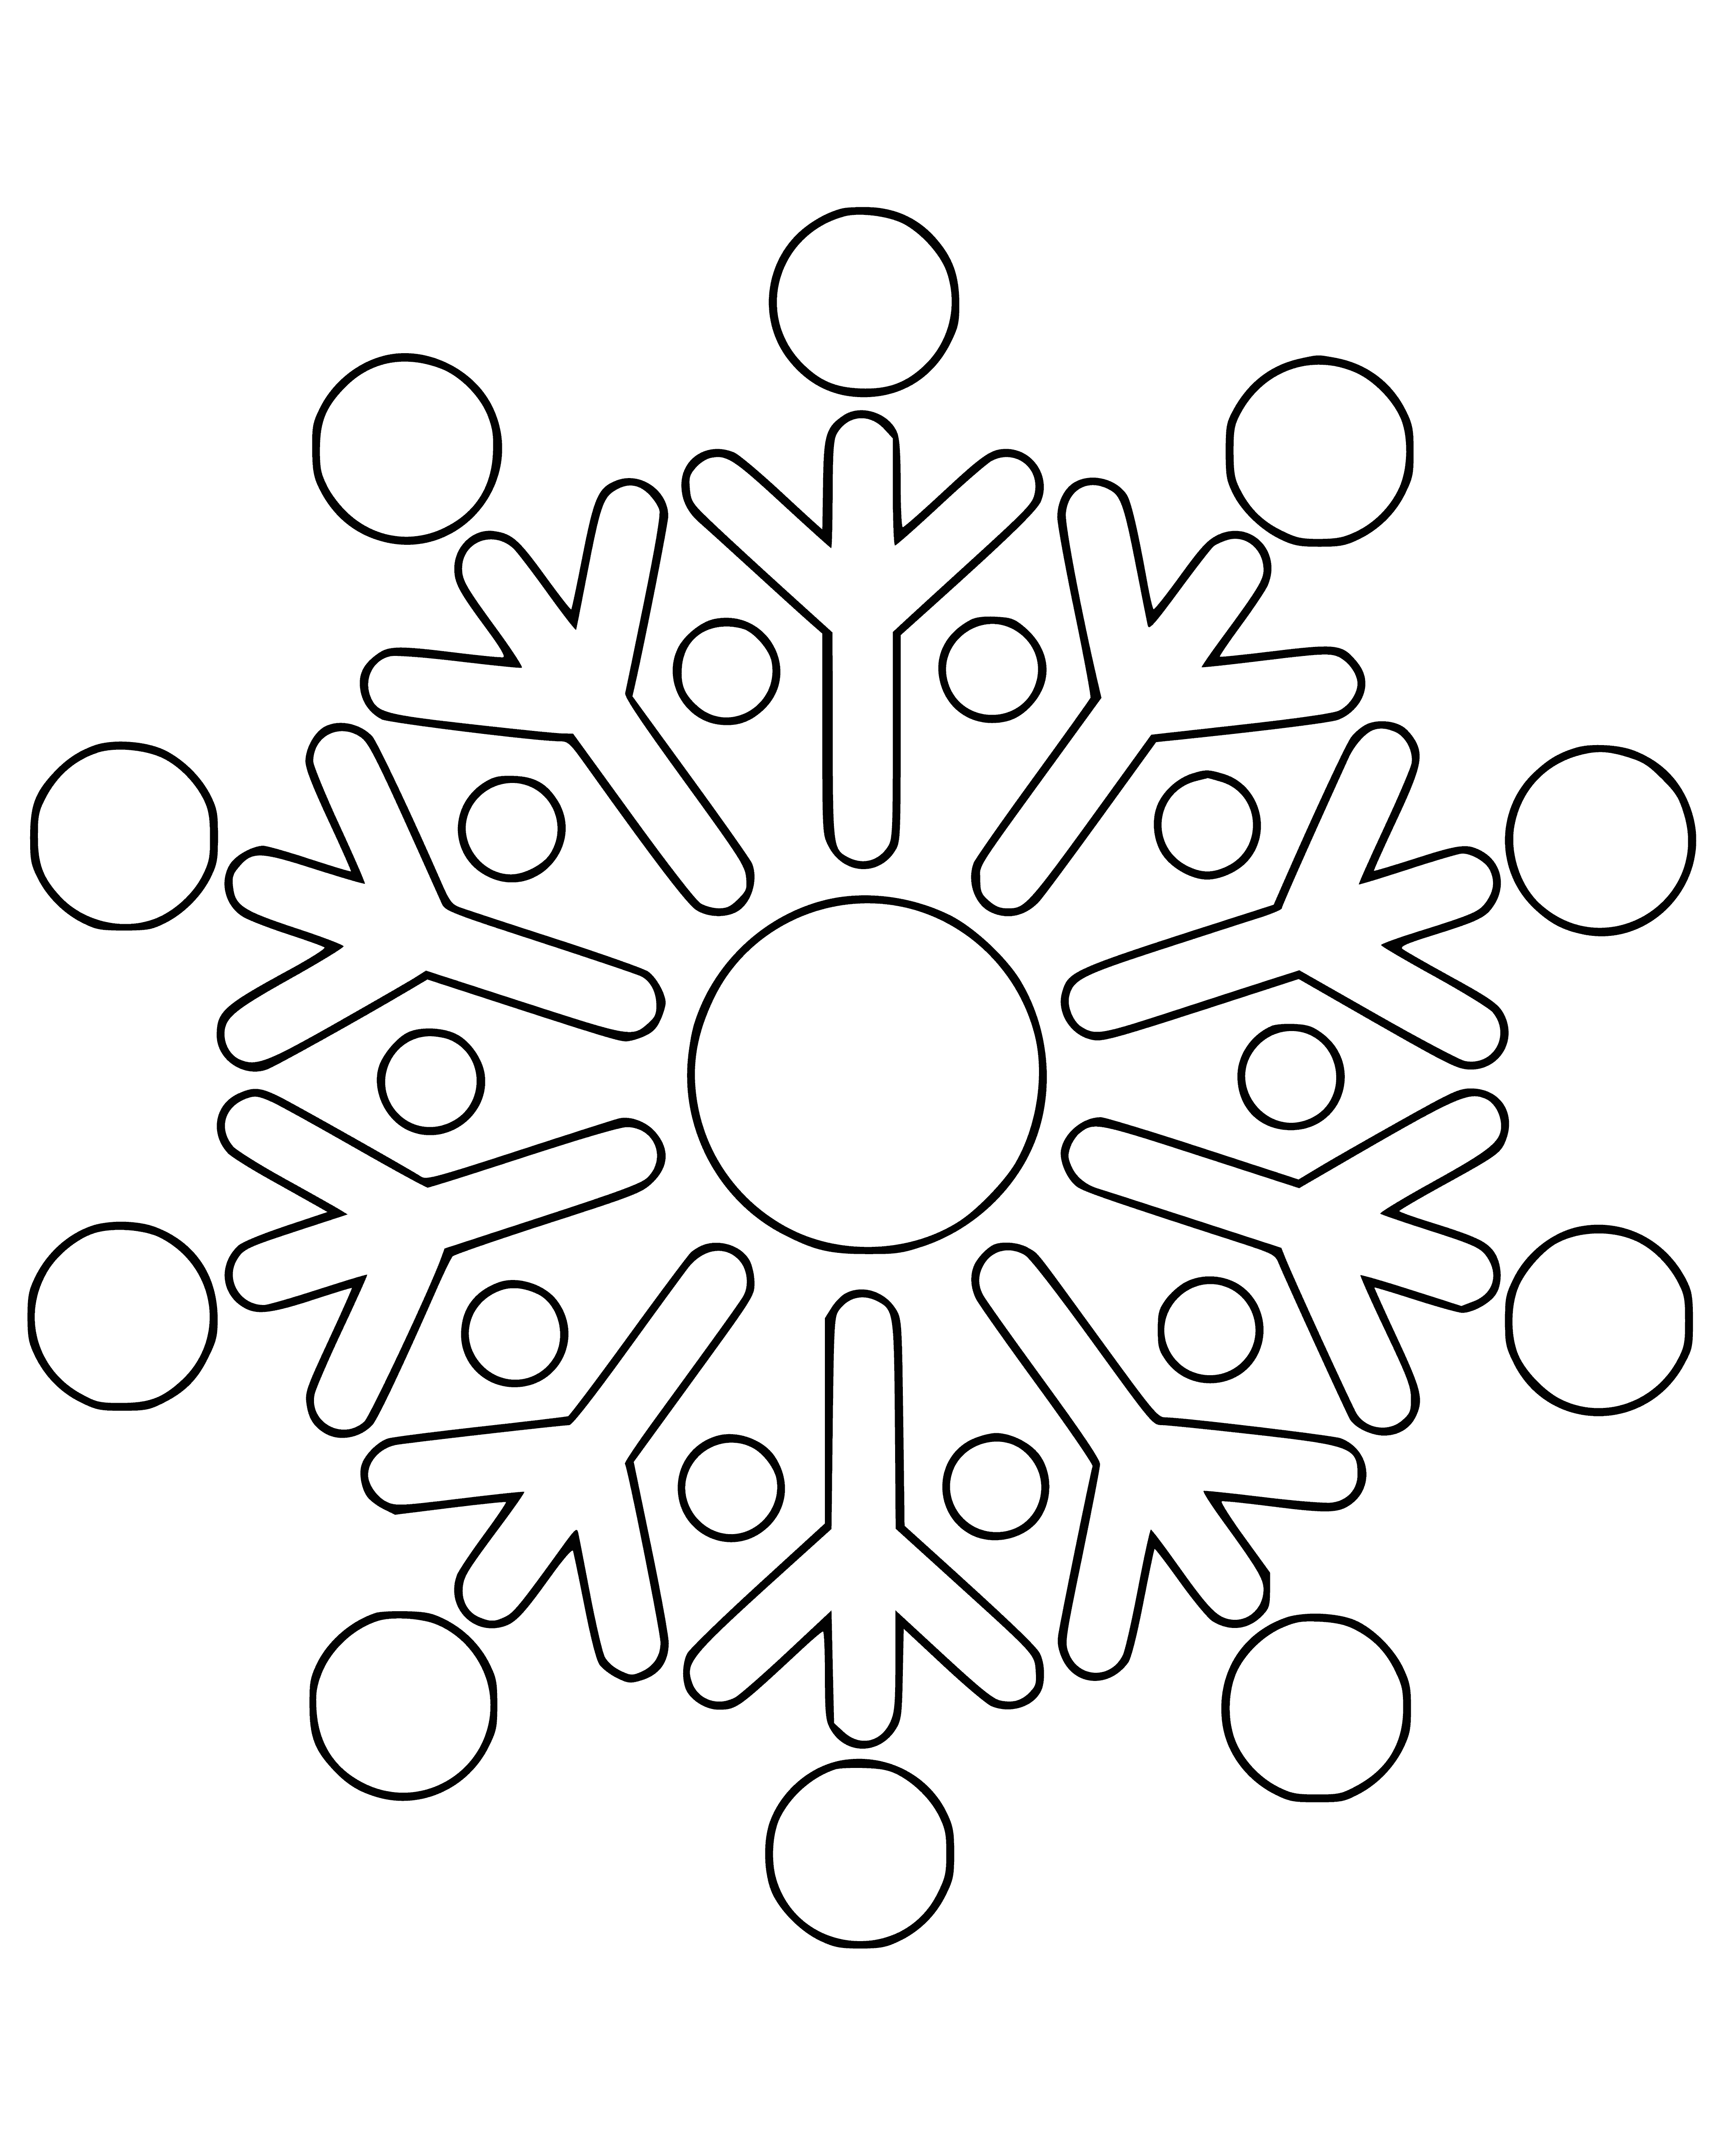 coloring page: Snowflake w/ delicate details in the center, surrounded by thin border. #wintervibes